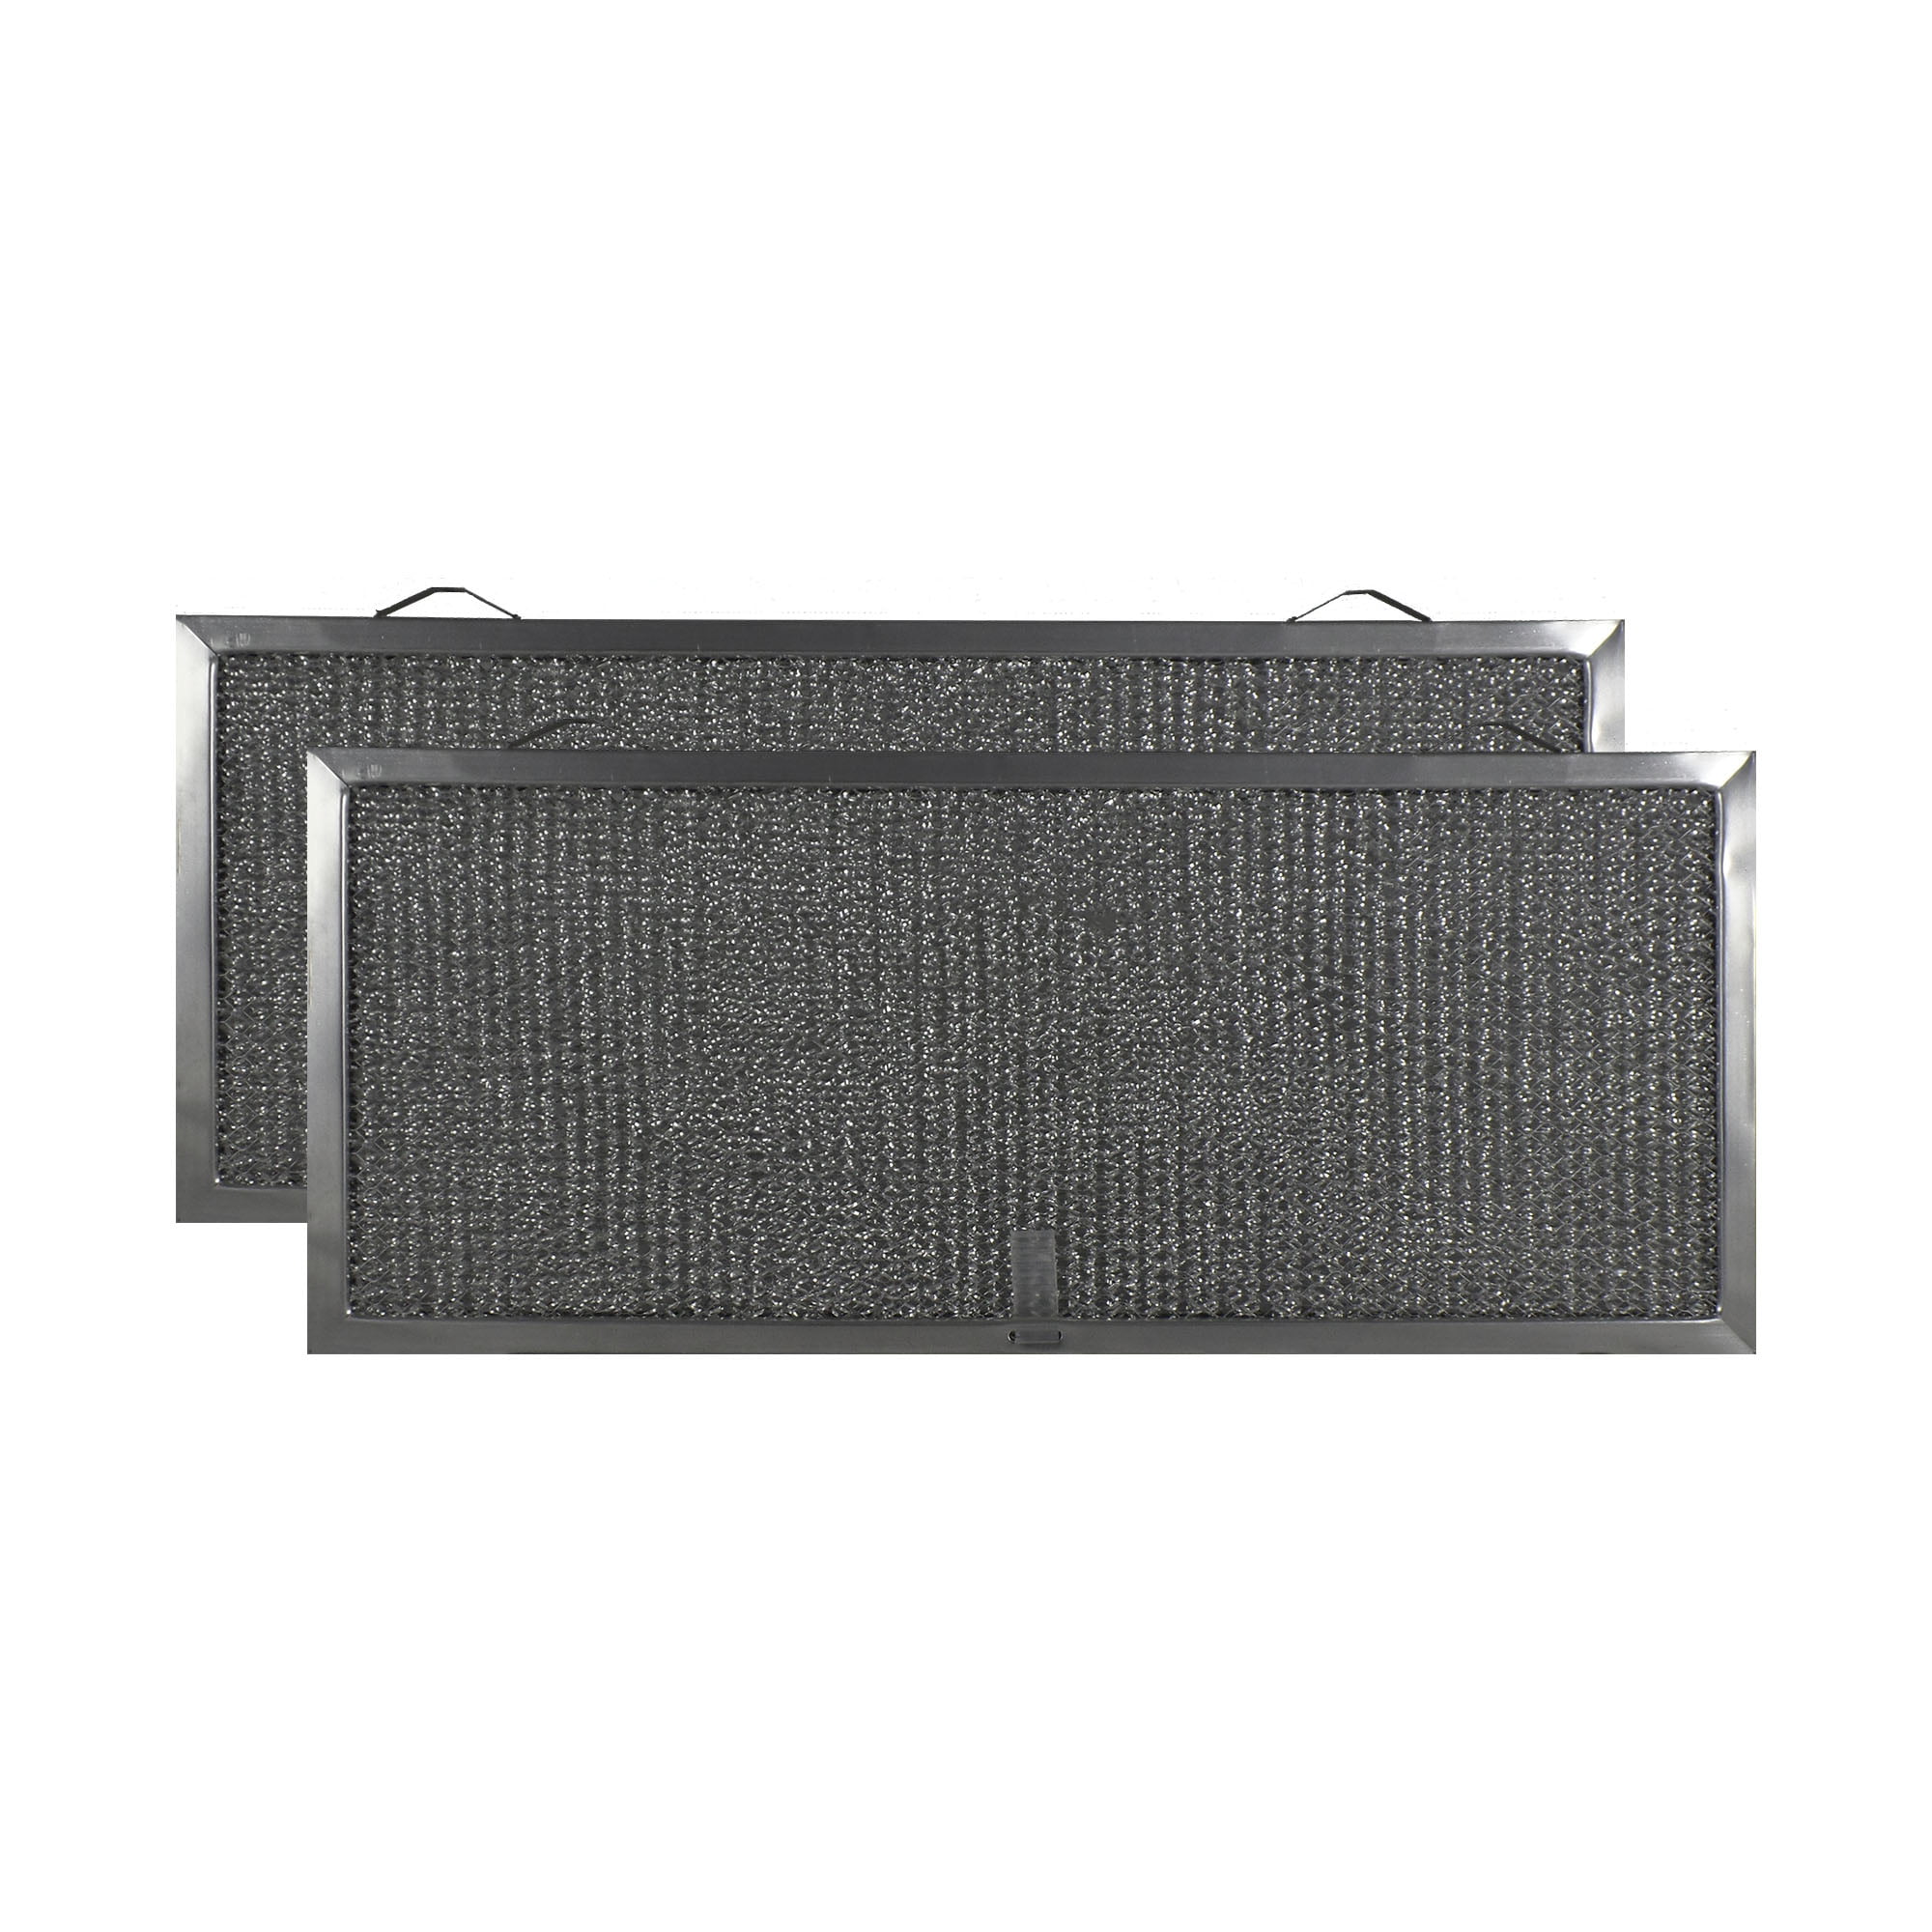 Details about   Heavy Duty Industrial  Exhaust Vent Filter 7-1/4" X 7-1/4" X 1" 